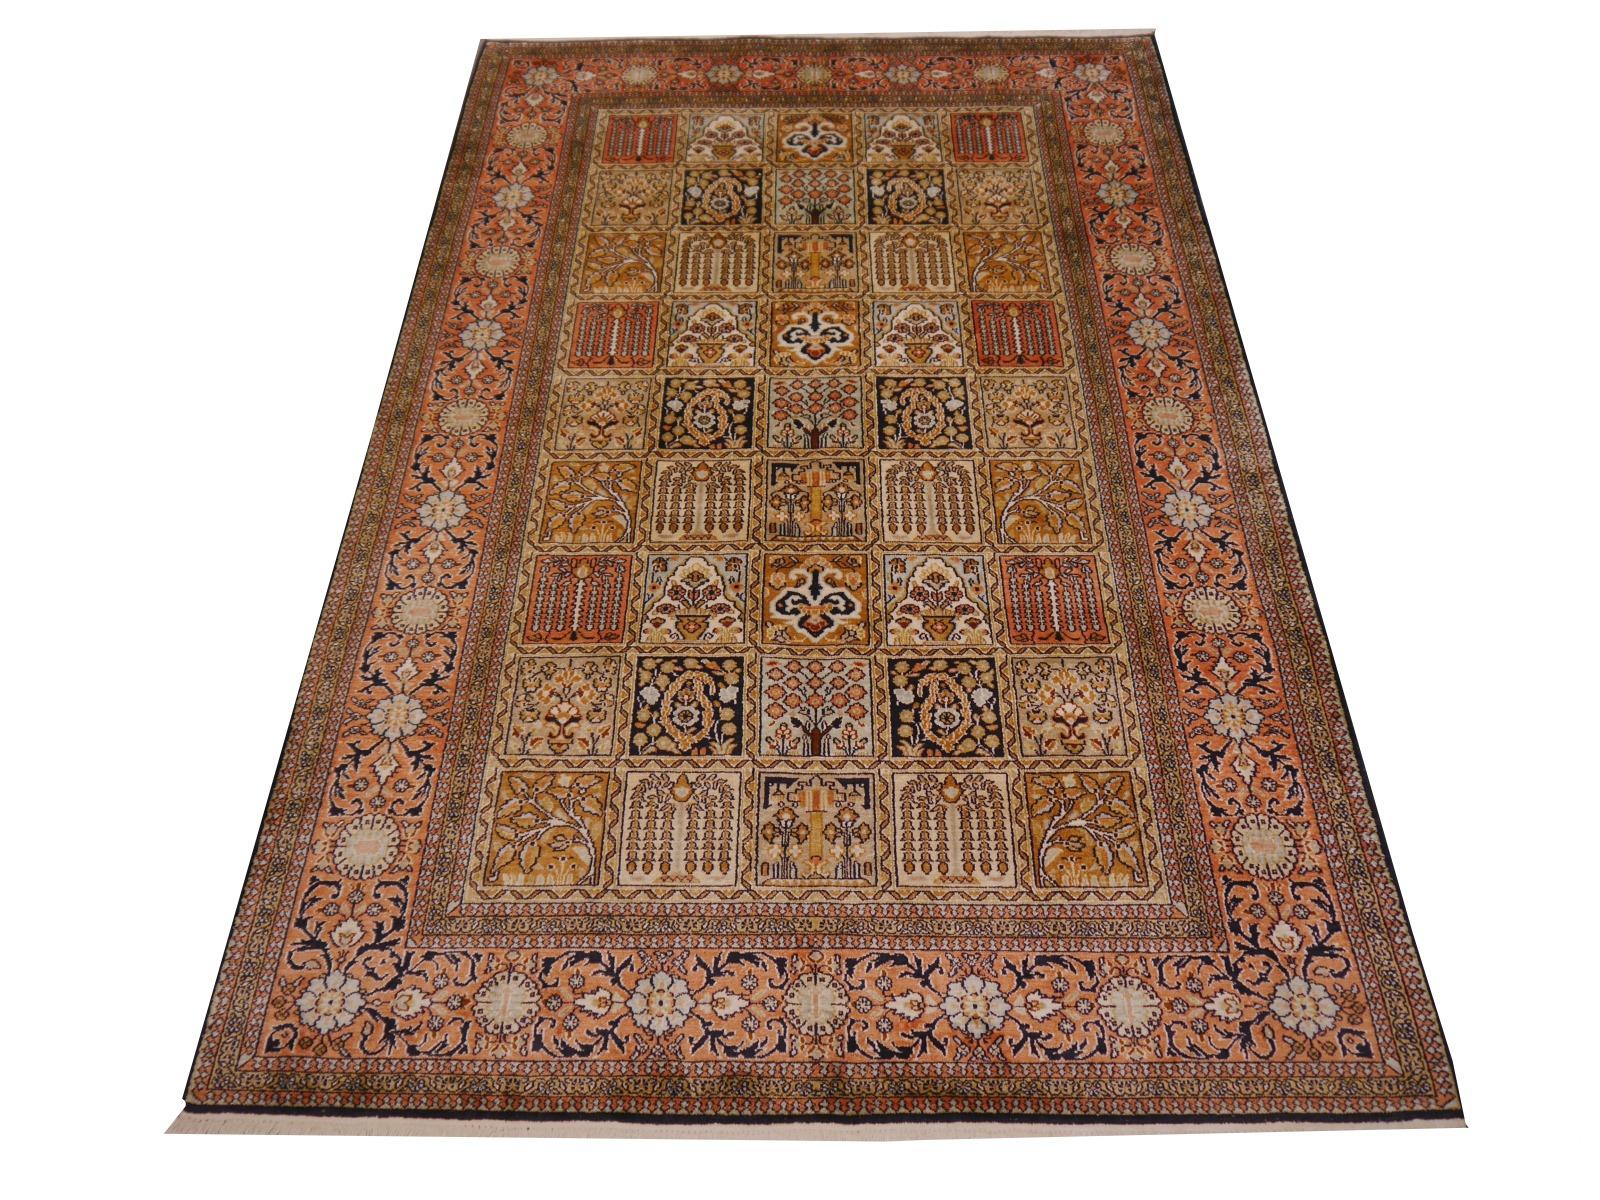 Fine Kashmir pure silk pile rug. 

Rug making has a long tradition in the northern parts of India. Kashmir is a main center of rug production - silk as well as wool. Kashmir rugs are very famous throughout the world for their quality and beauty.